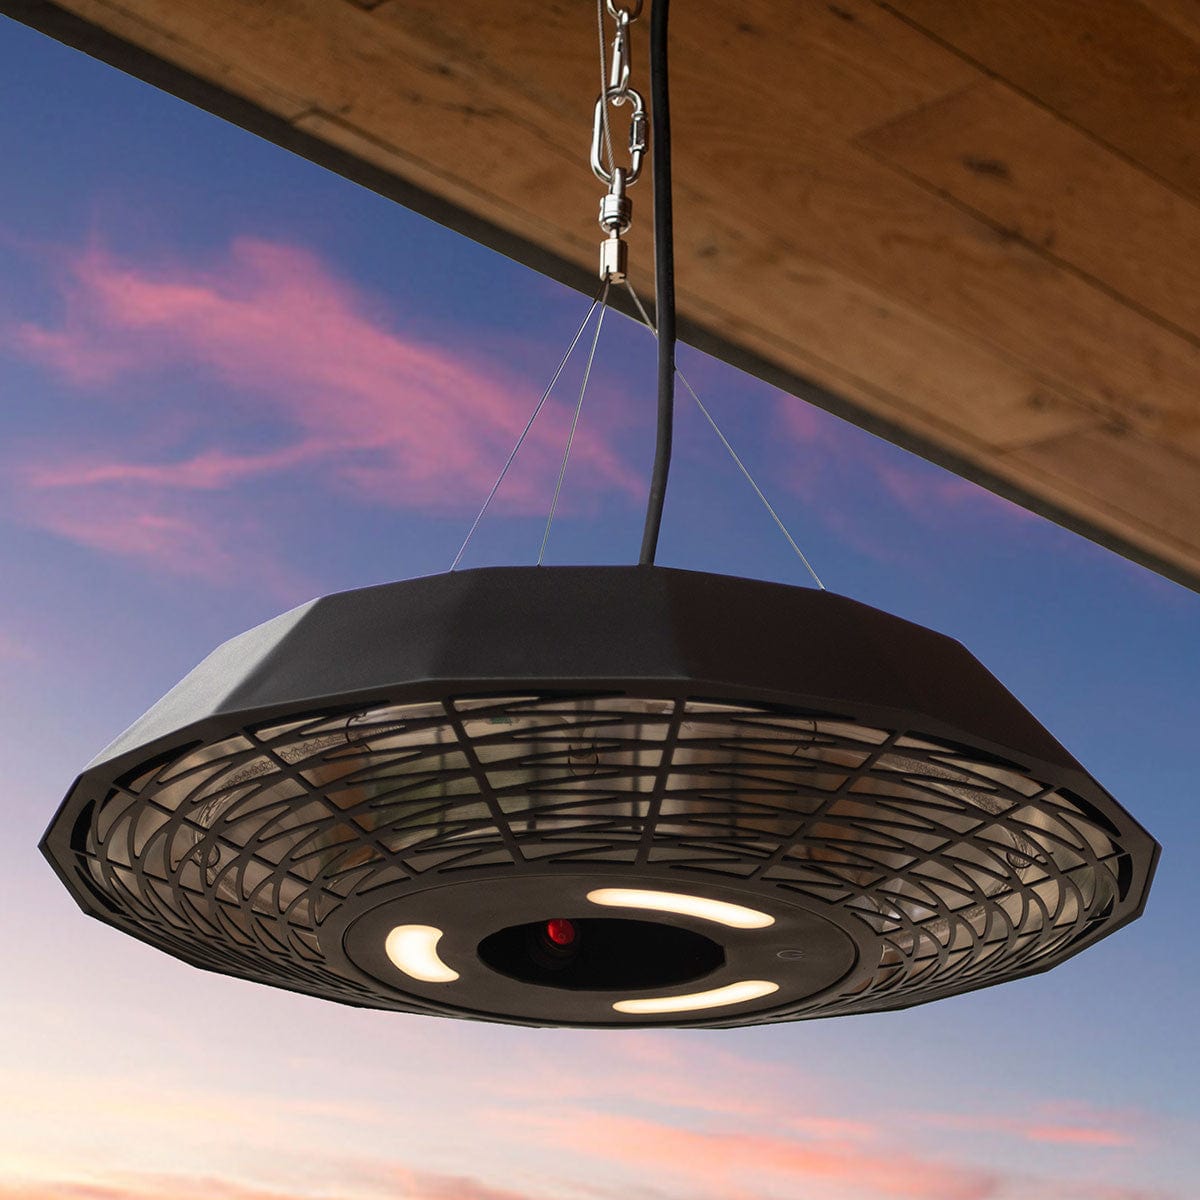 Maze Outdoors 2000W Helio Hanging Electric Patio Heater House of Isabella UK